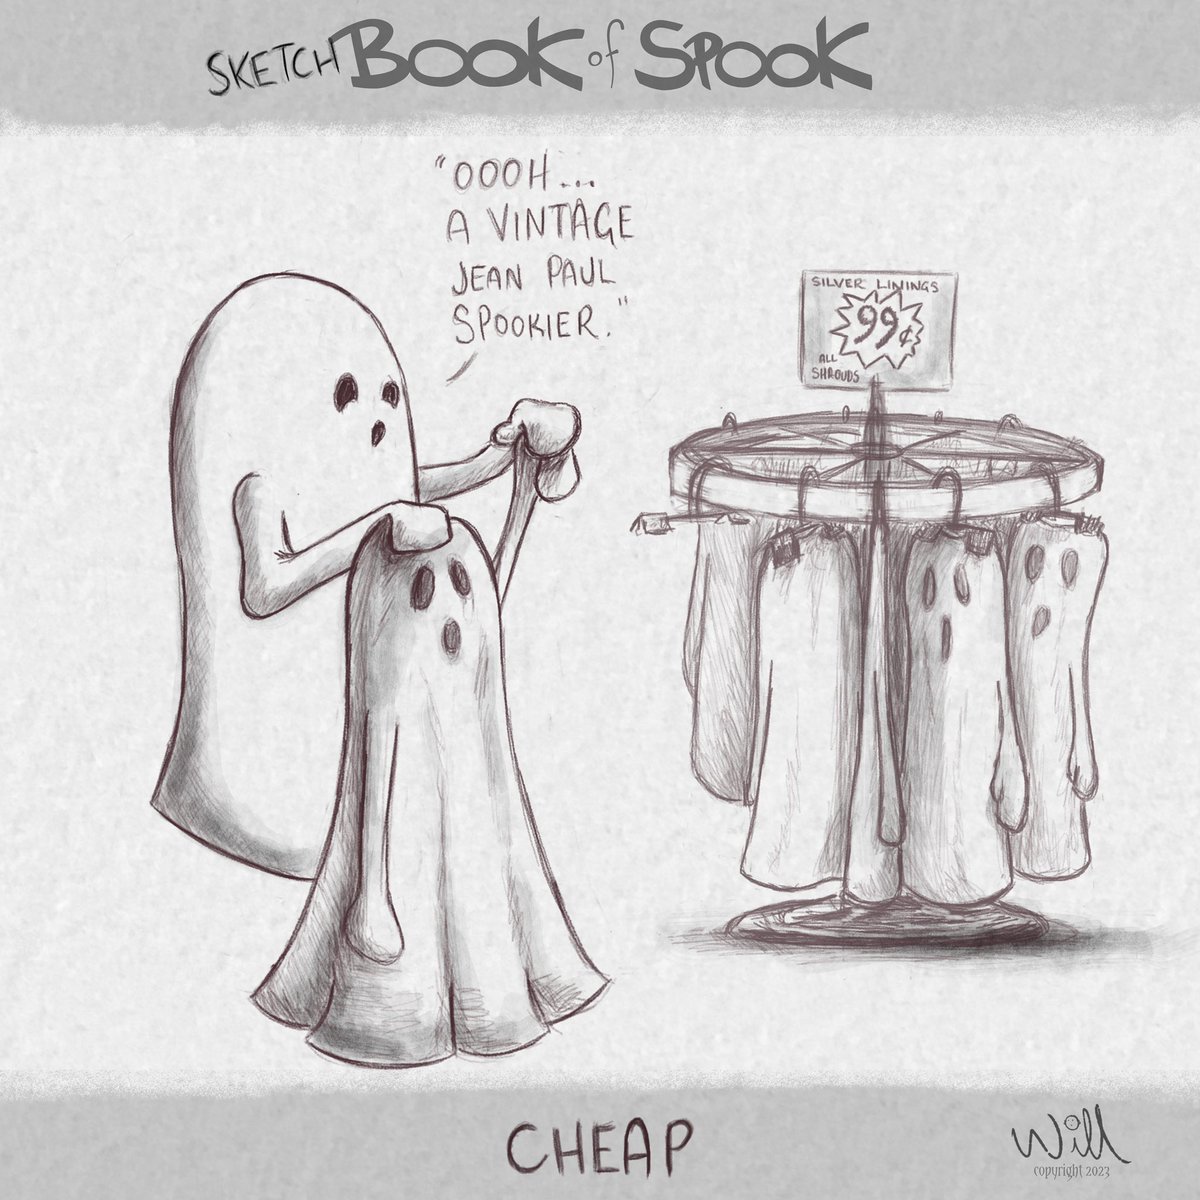 No.2 from 2018 that I want to complete: Cheap

#bookofspook #AuGHOST #thriftshopping